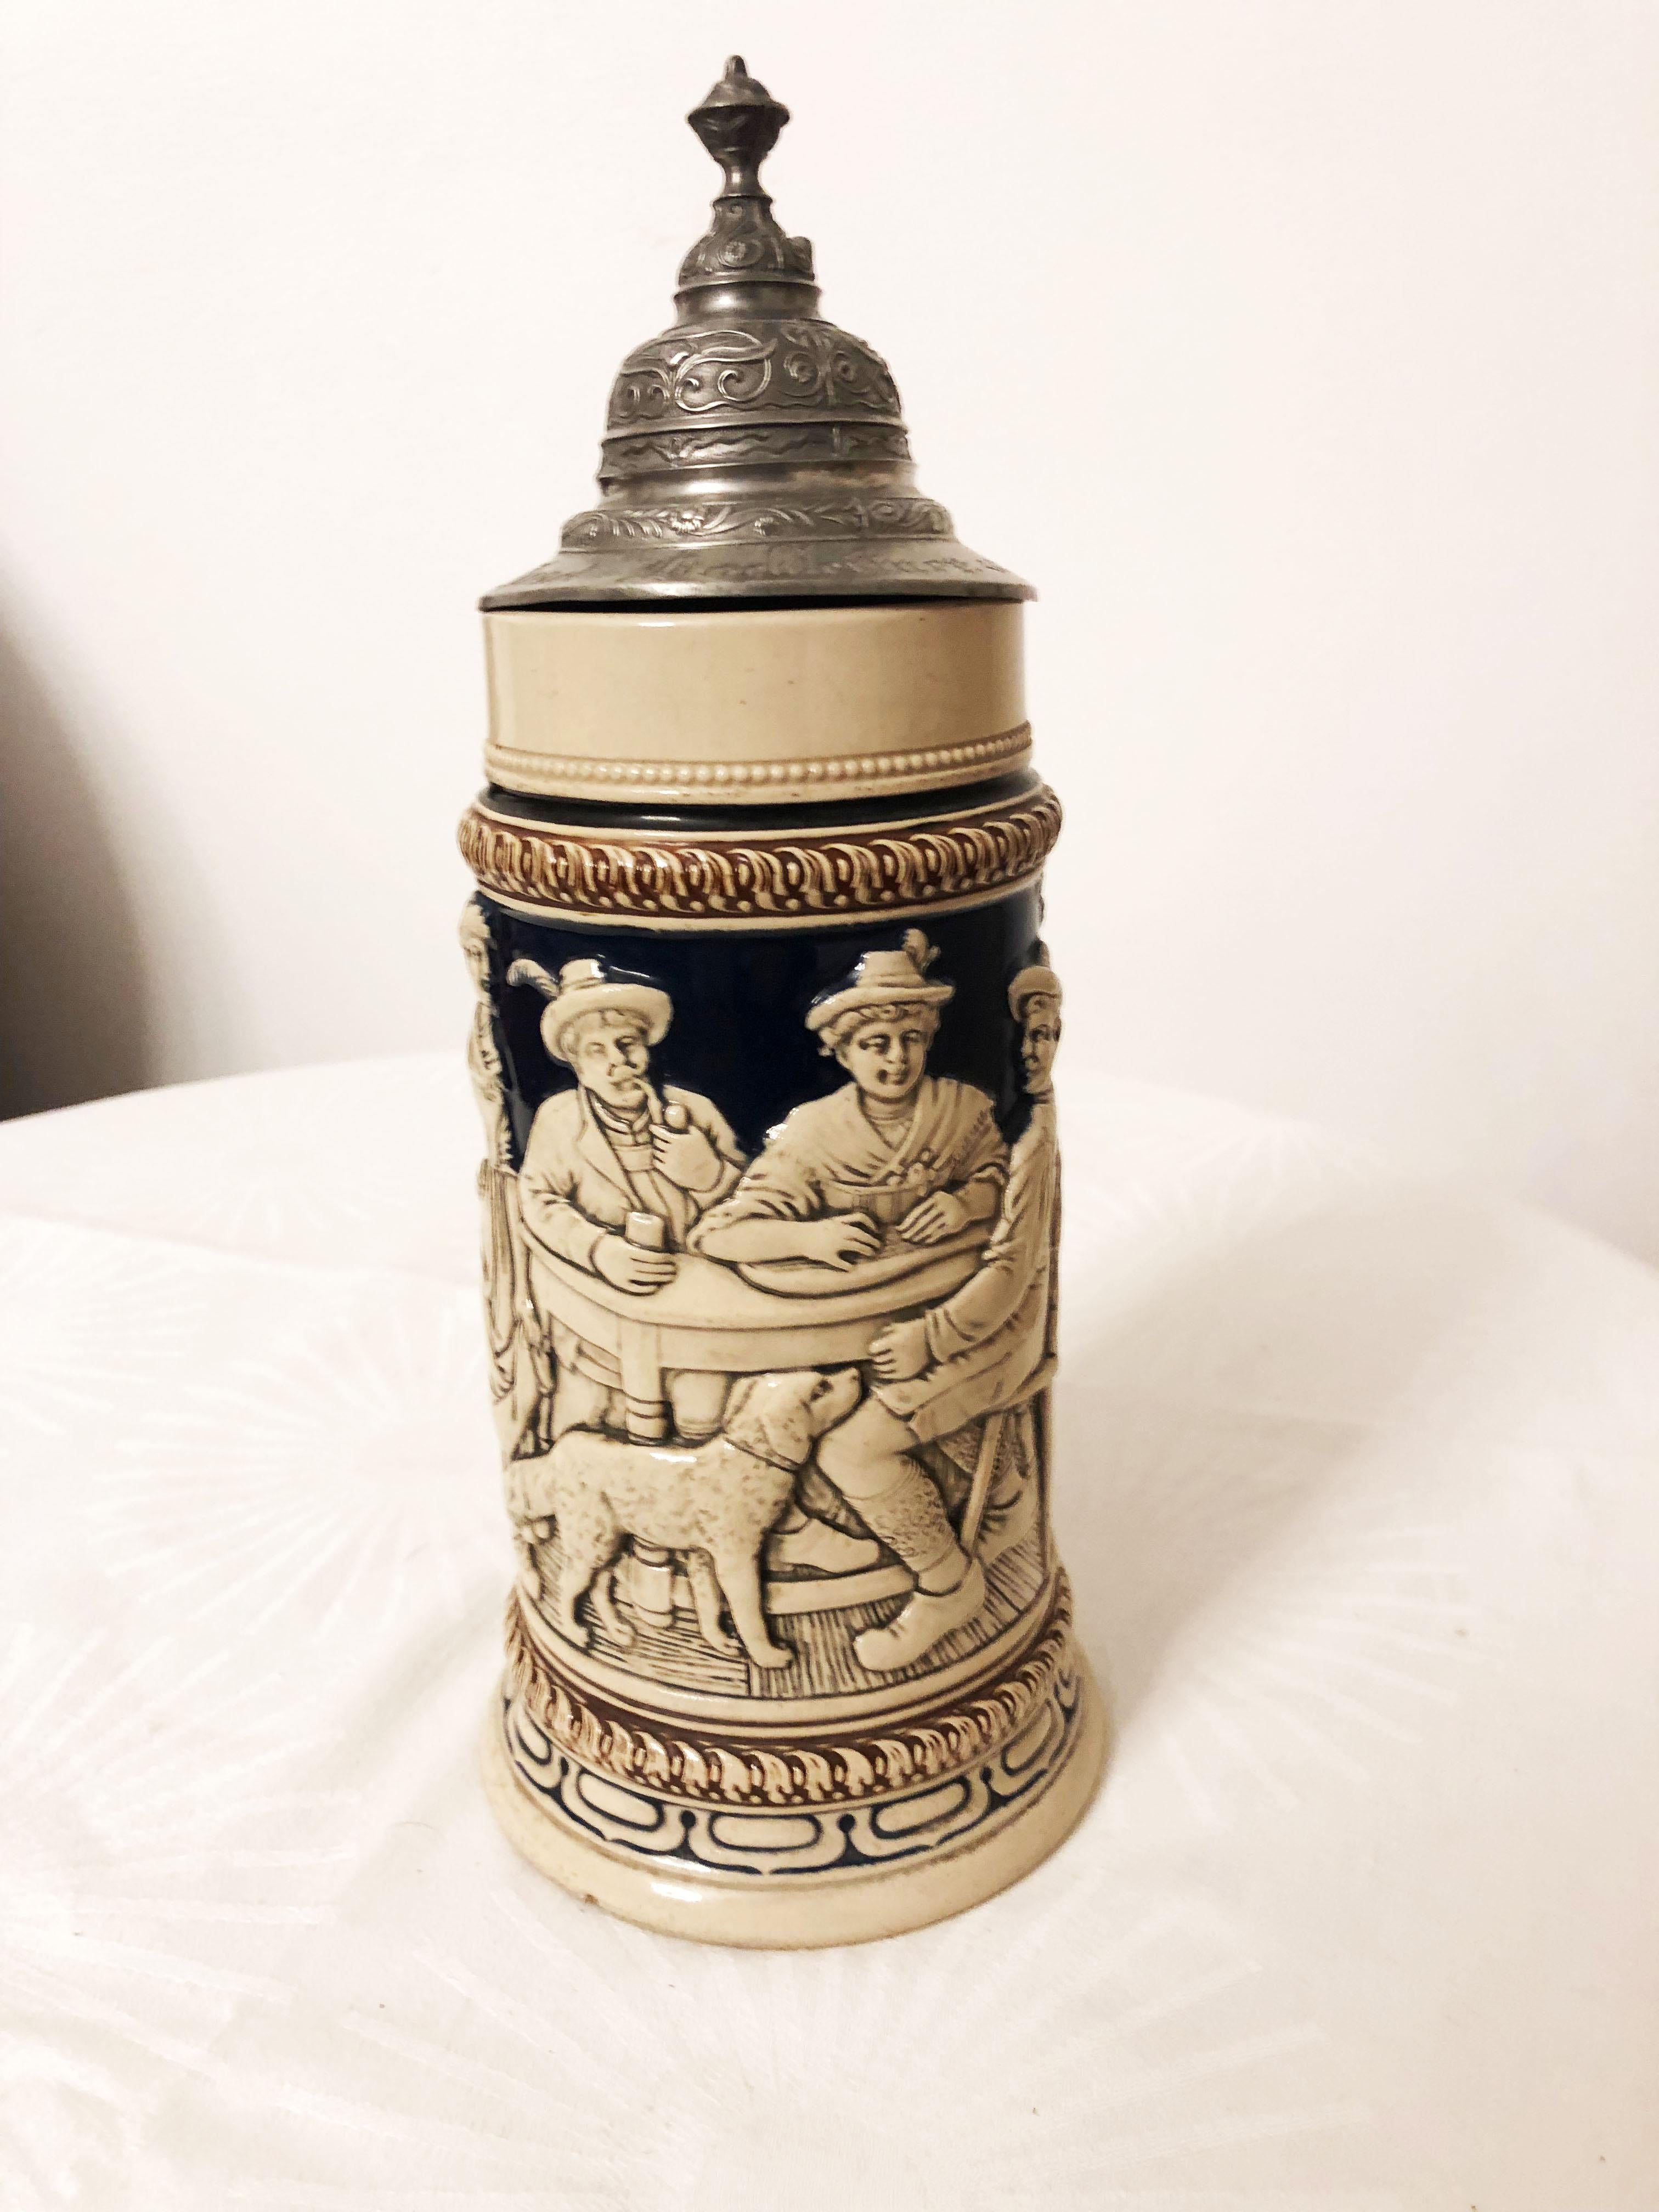 Stoneware 1/2 liter beer stein with an original pewter hinged lid. The body is decorated with a tavern scene.
Made in Germany, circa 1880.